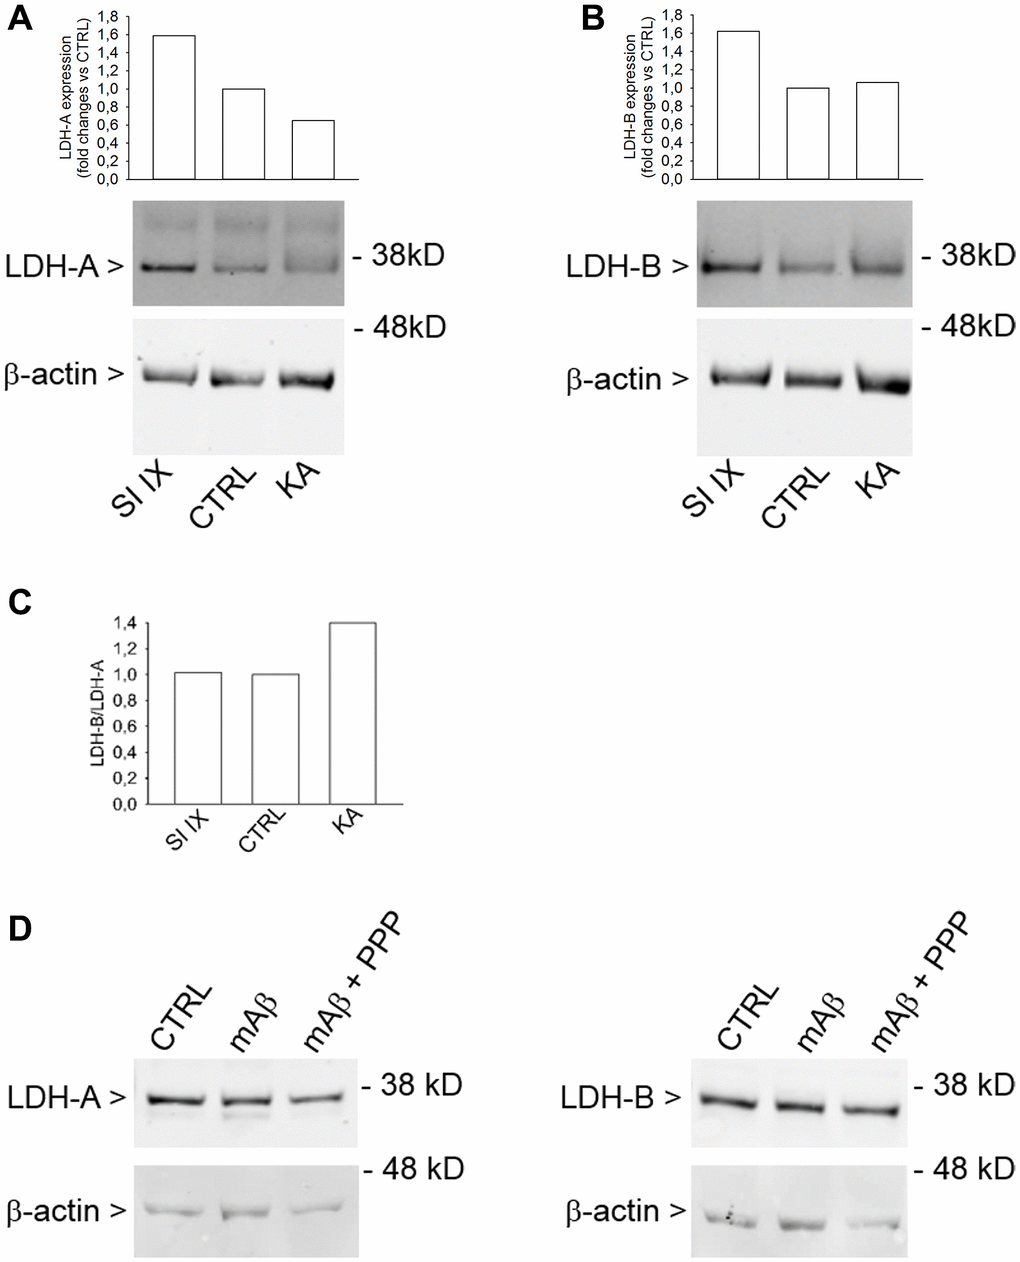 Increased LDH-B/LDH-A expression ratio in neurons challenged with kainate. Western blot analysis of LDH-A (A) and LDH-B (B) in lysates obtained from neurons that were deprived from glucose for 2 hr before returning to 3 mM glucose. Kainate (KA, 100 μM for 40 min) reduced LDH-A (A) without affecting LDH-B expression (B). γ-Secretase inhibitor IX (SI IX), 100 nM during glucose deprivation and for 40 min following glucose re-addition, increased both LDH-A (A) and LDH-B (B) expression. In (A and B), graph bars represent fold changes of LDH-A and LDH-B over the respective control (CTRL). Densitometry signals were normalized on β-actin. In (C), graph bars represent the ratio between LDH-B and LDH-A values as expressed in (B and A), respectively. The experiment was repeated twice with similar results. Hybridization signals were detected with the Odyssey infrared imaging system in their original green or red colors and automatically converted into greyscale. In (D), western blot images of LDH-A and LDH-B in lysates from neurons that, following glucose deprivation and replenishing, were exposed to Aβ42 monomers in the absence (mAβ, 100 nM for 40 min) and in the presence of 500 nM PPP (mAβ + PPP). None of the treatments modified LDH-A or LDH-B expression.